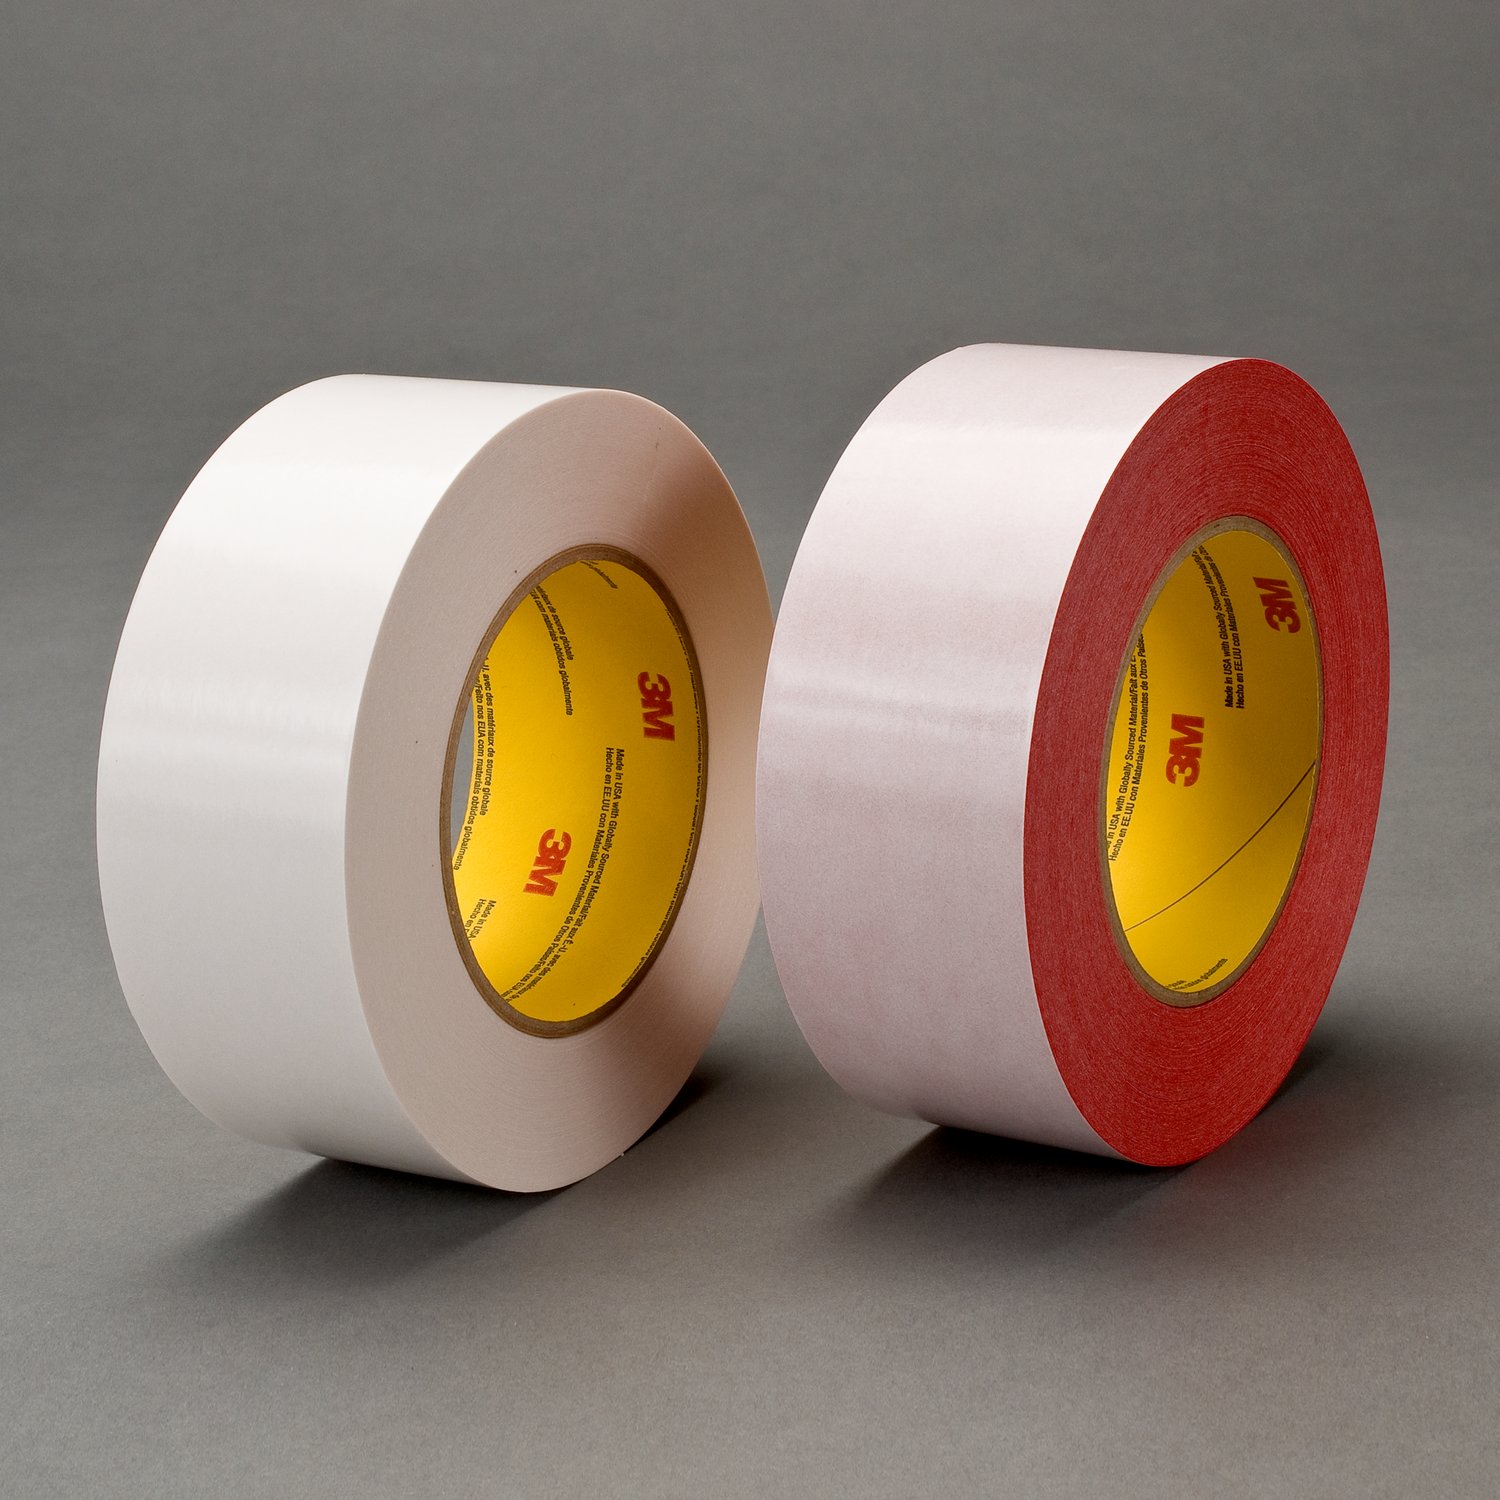 7010295859 - 3M Double Coated Tape 9738, Clear, 54 in x 60 yd, 4.3 mil, 1 roll per
case